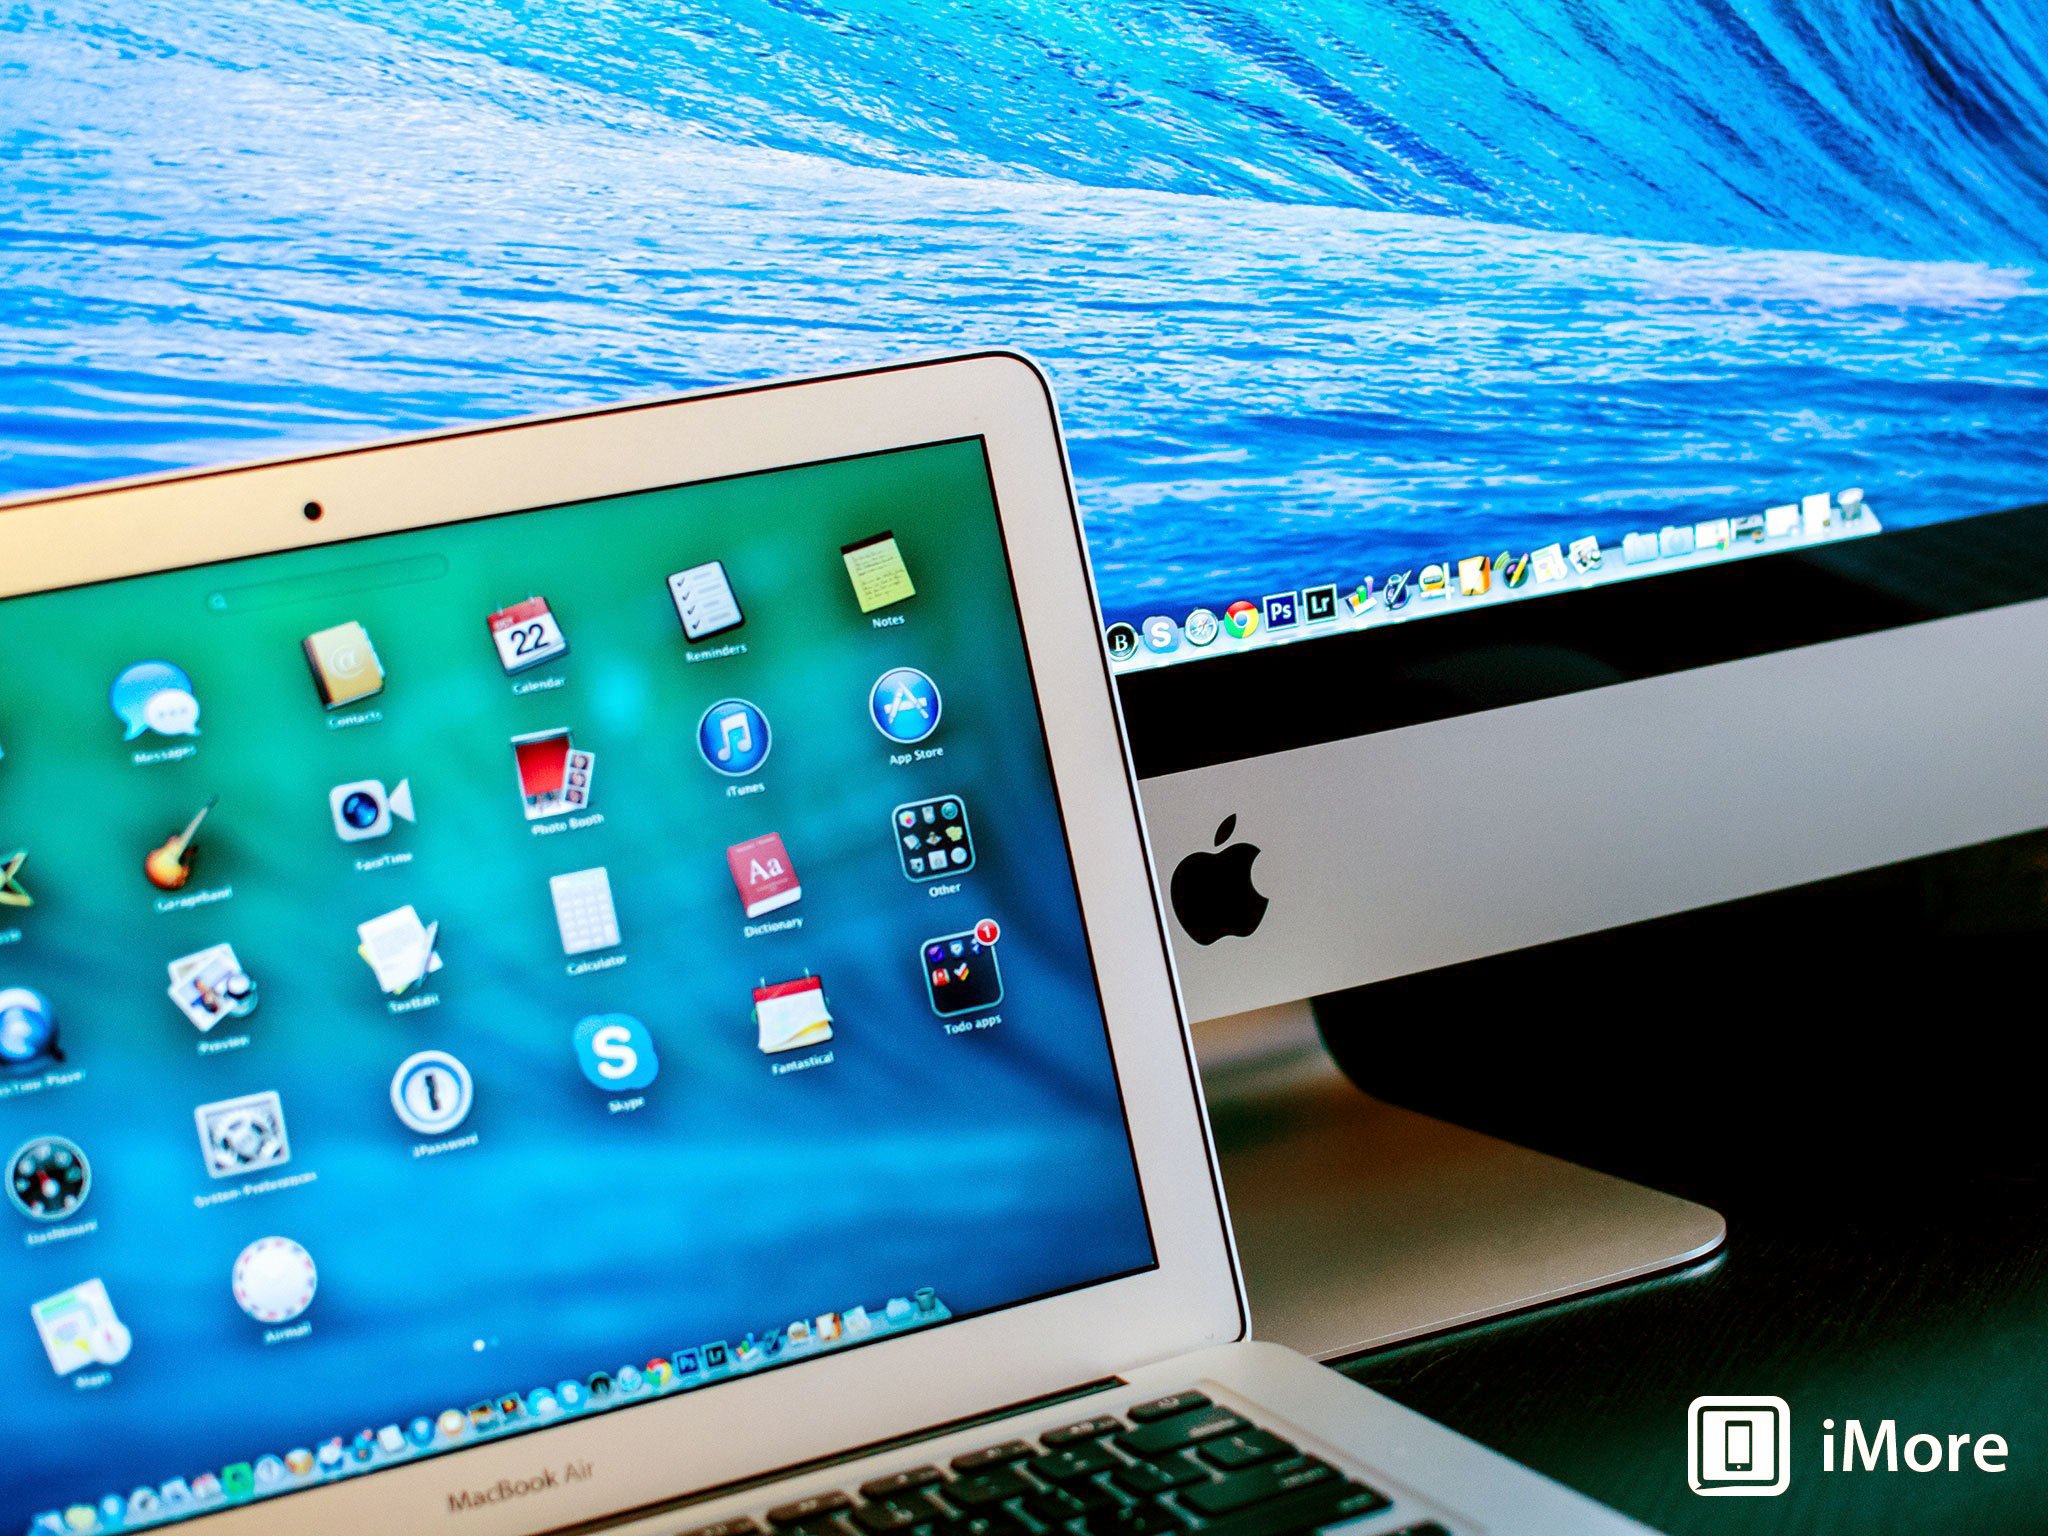 How to stop receiving notifications from a website in OS X Mavericks